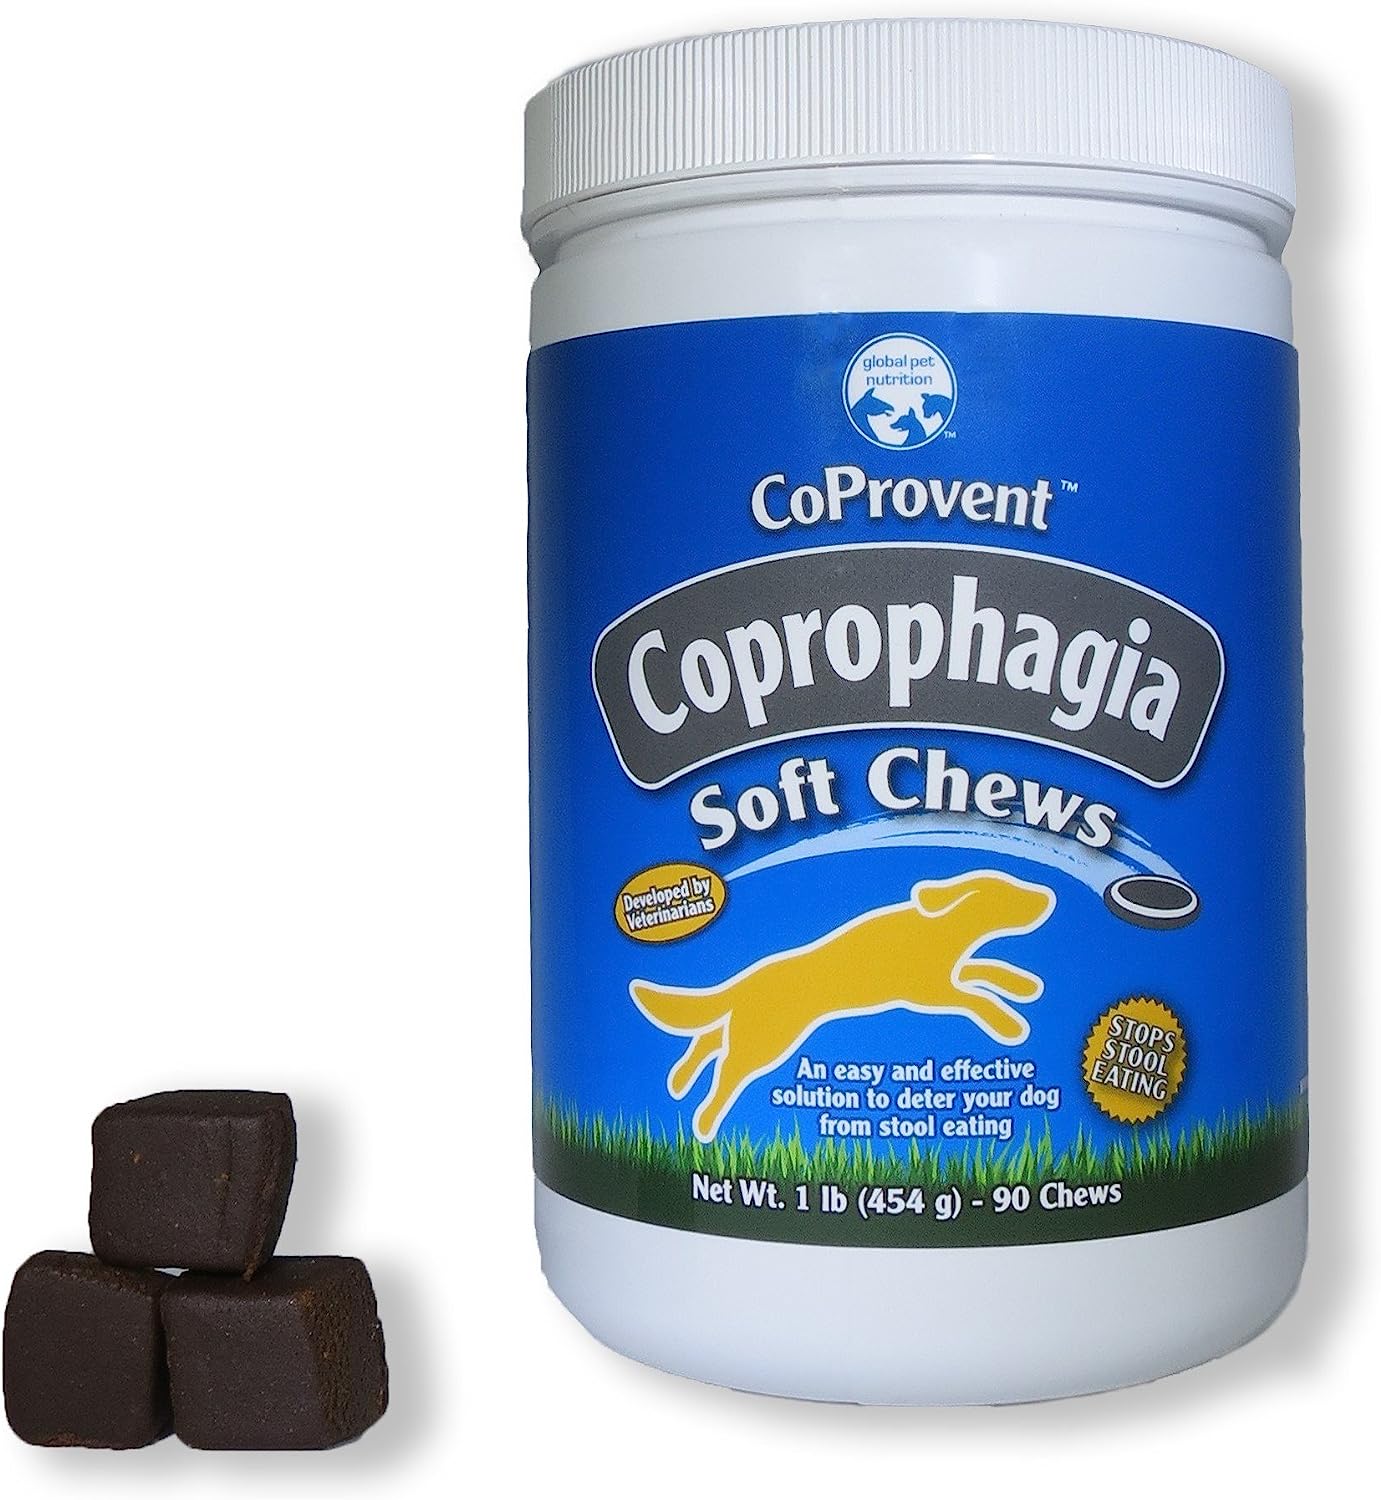 10. Global Pet Coprovent Coprophagia Soft Chews for Dogs